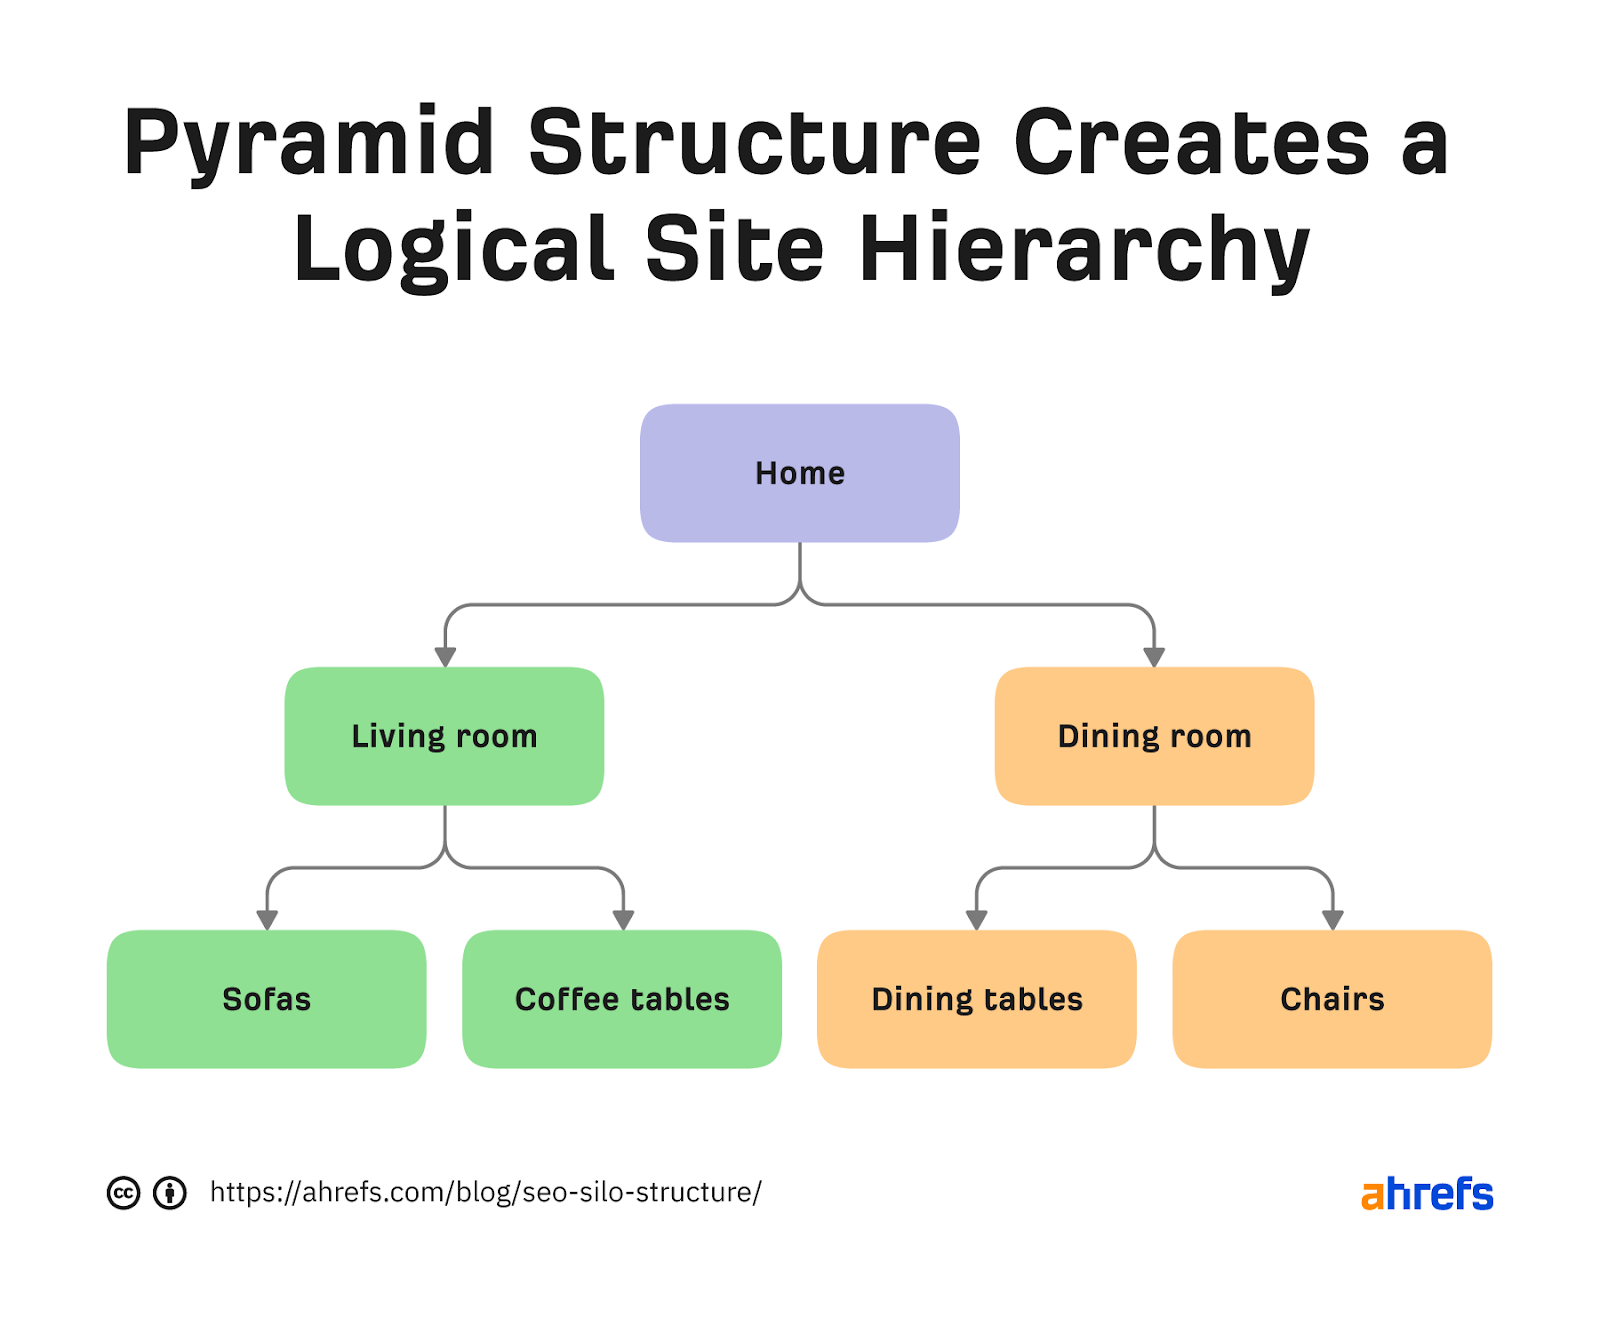 Flowchart of pyramid structure with 